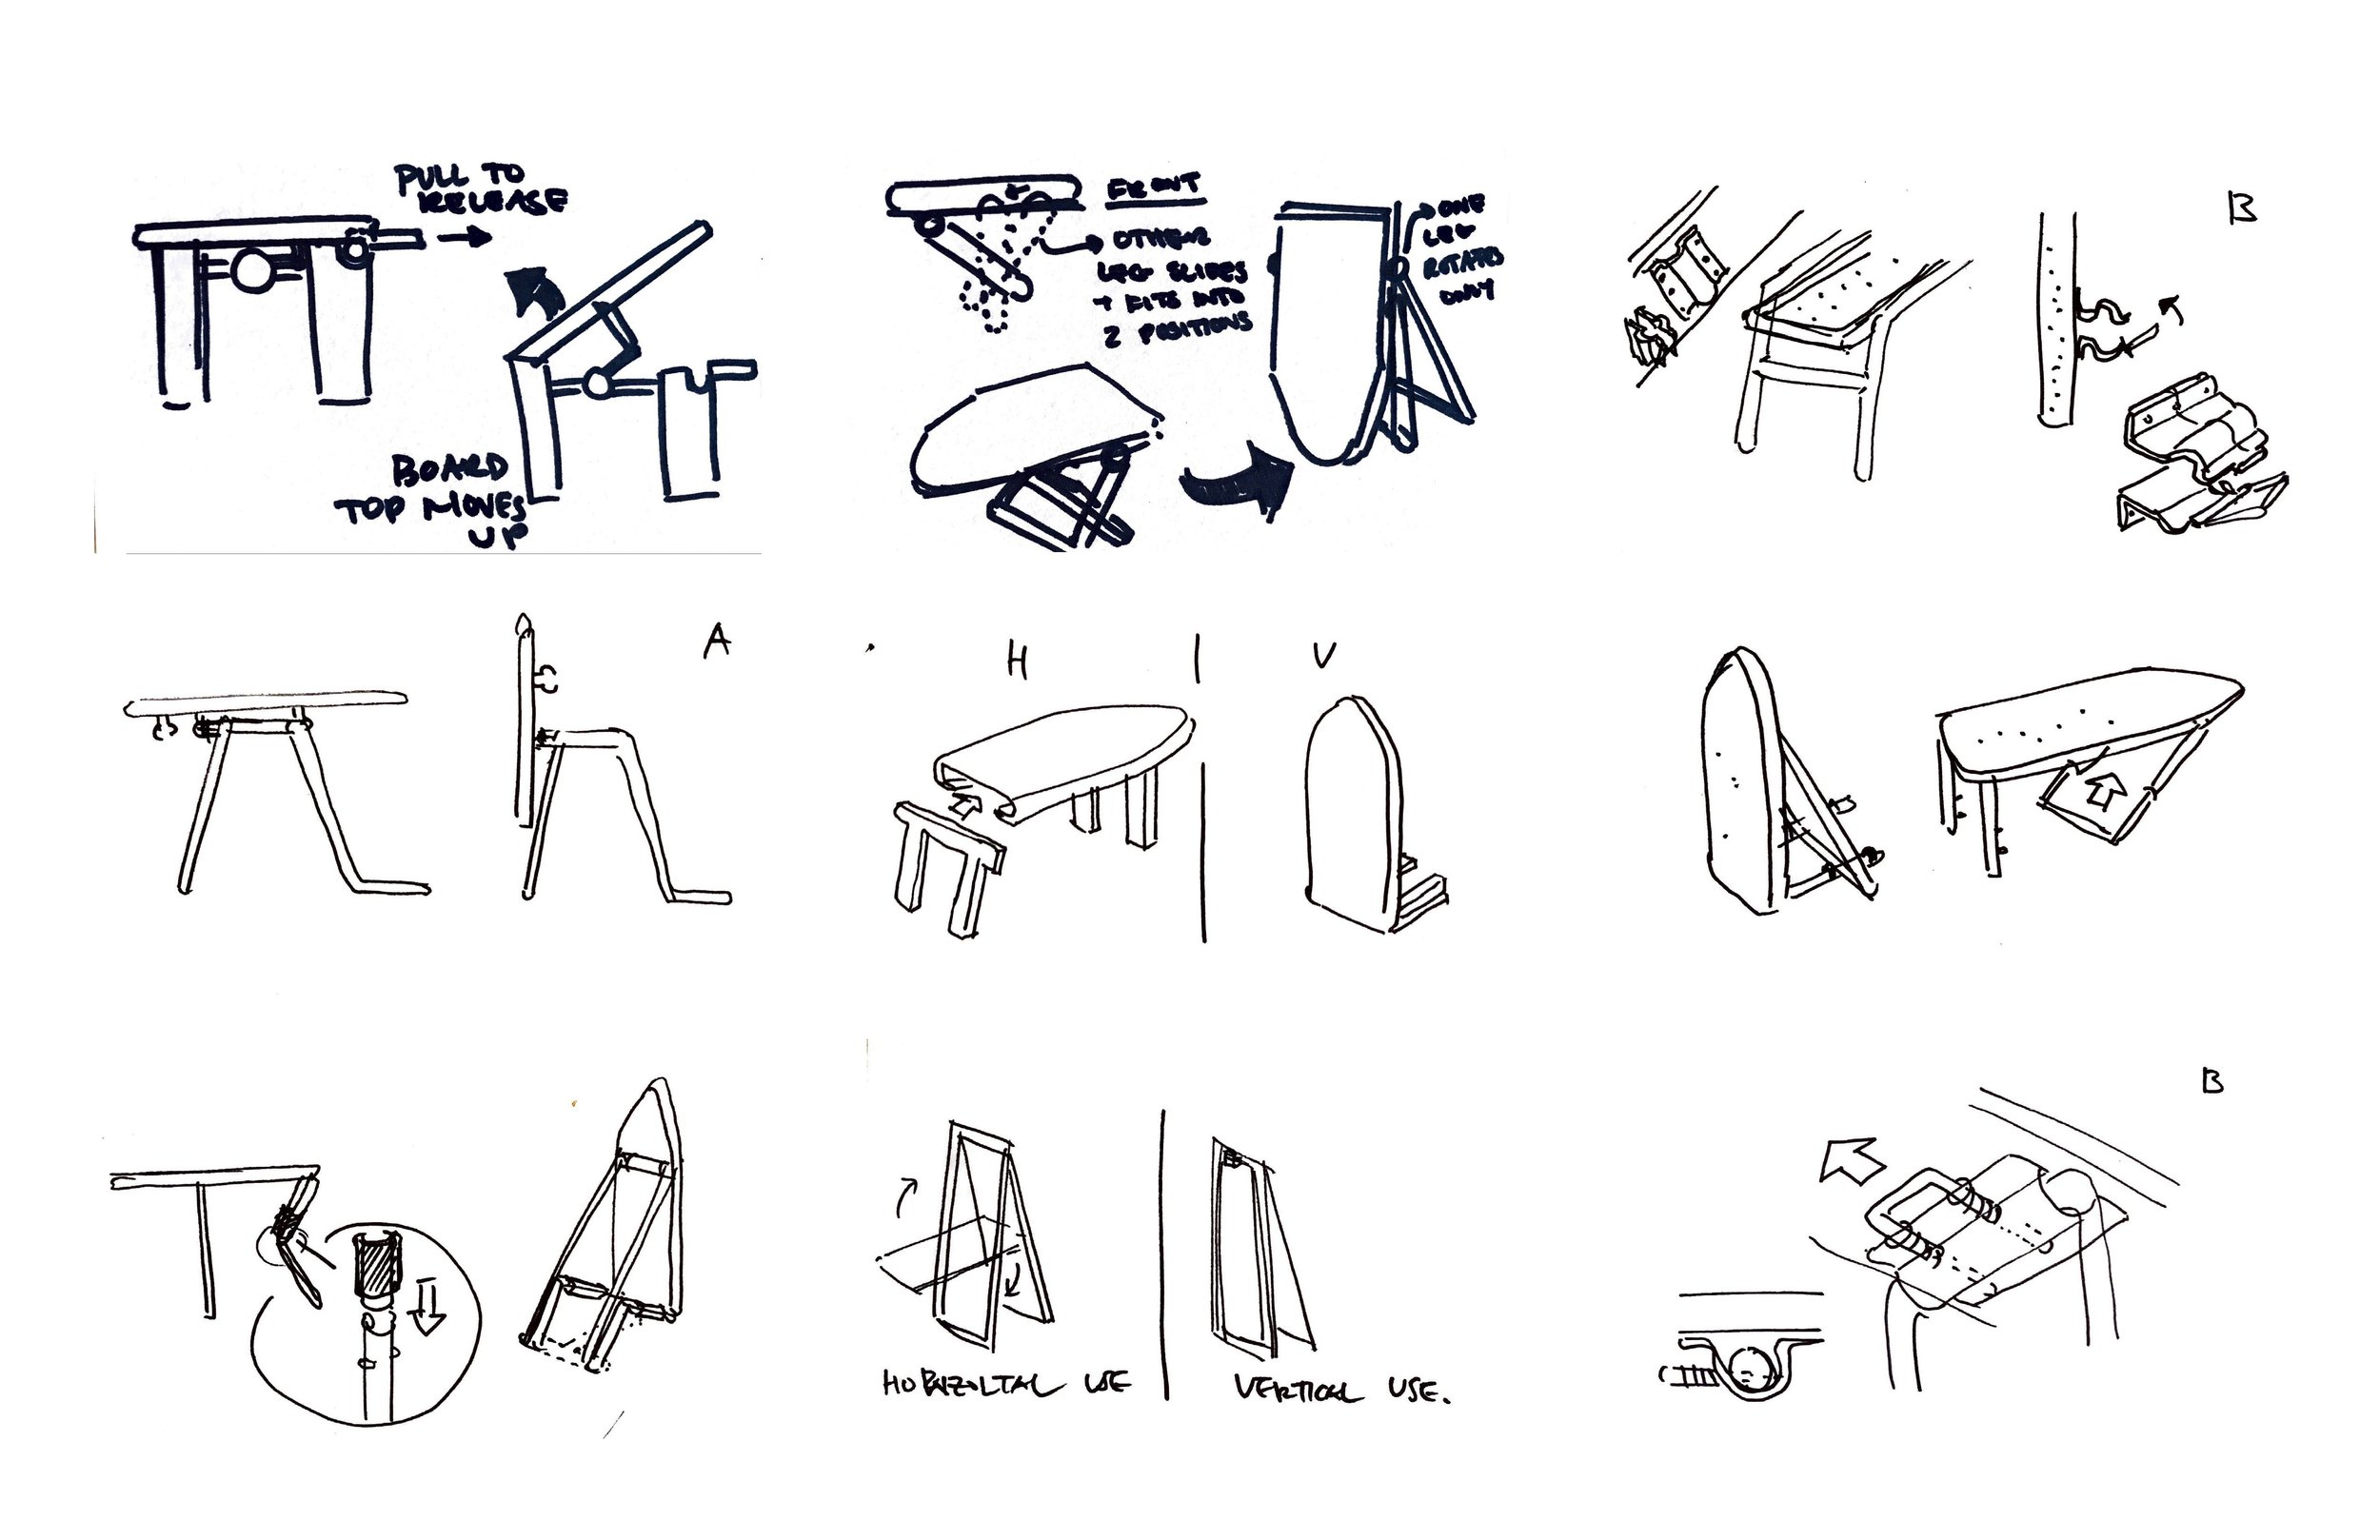 20-0504_HPI_Next Gen Ironing Board_Mechanism Exploration_Concepts only_Page_6.jpg